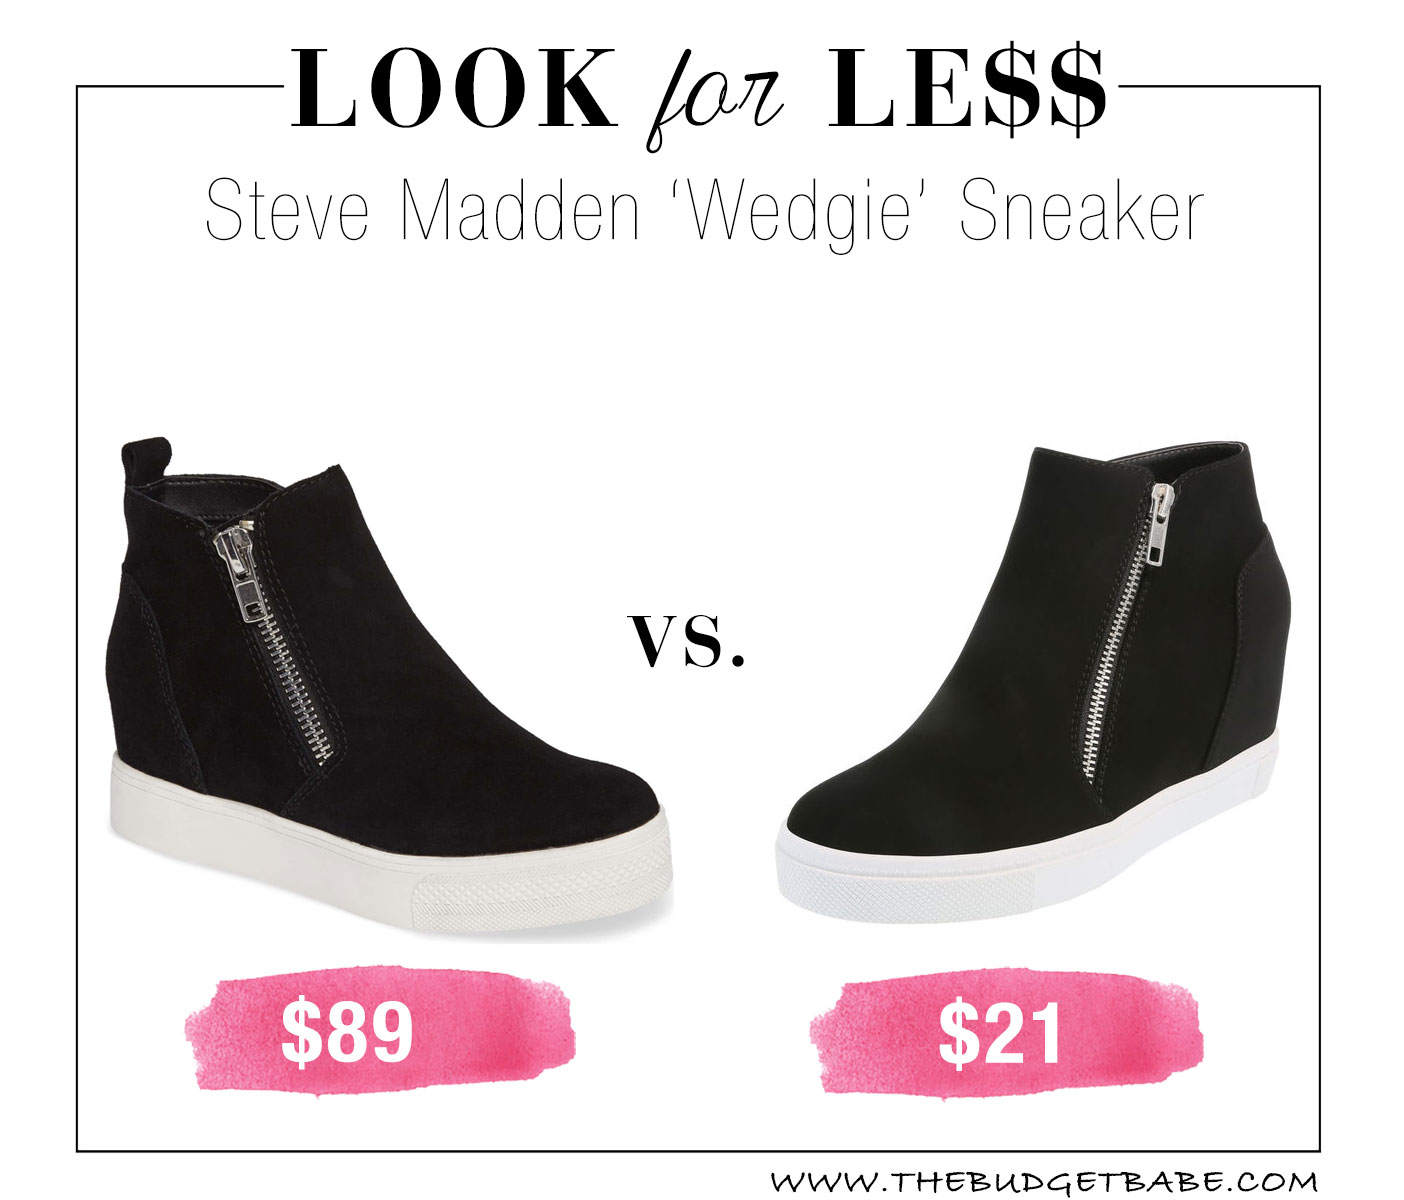 Steve Madden Wedge Sneaker dupe at Payless!